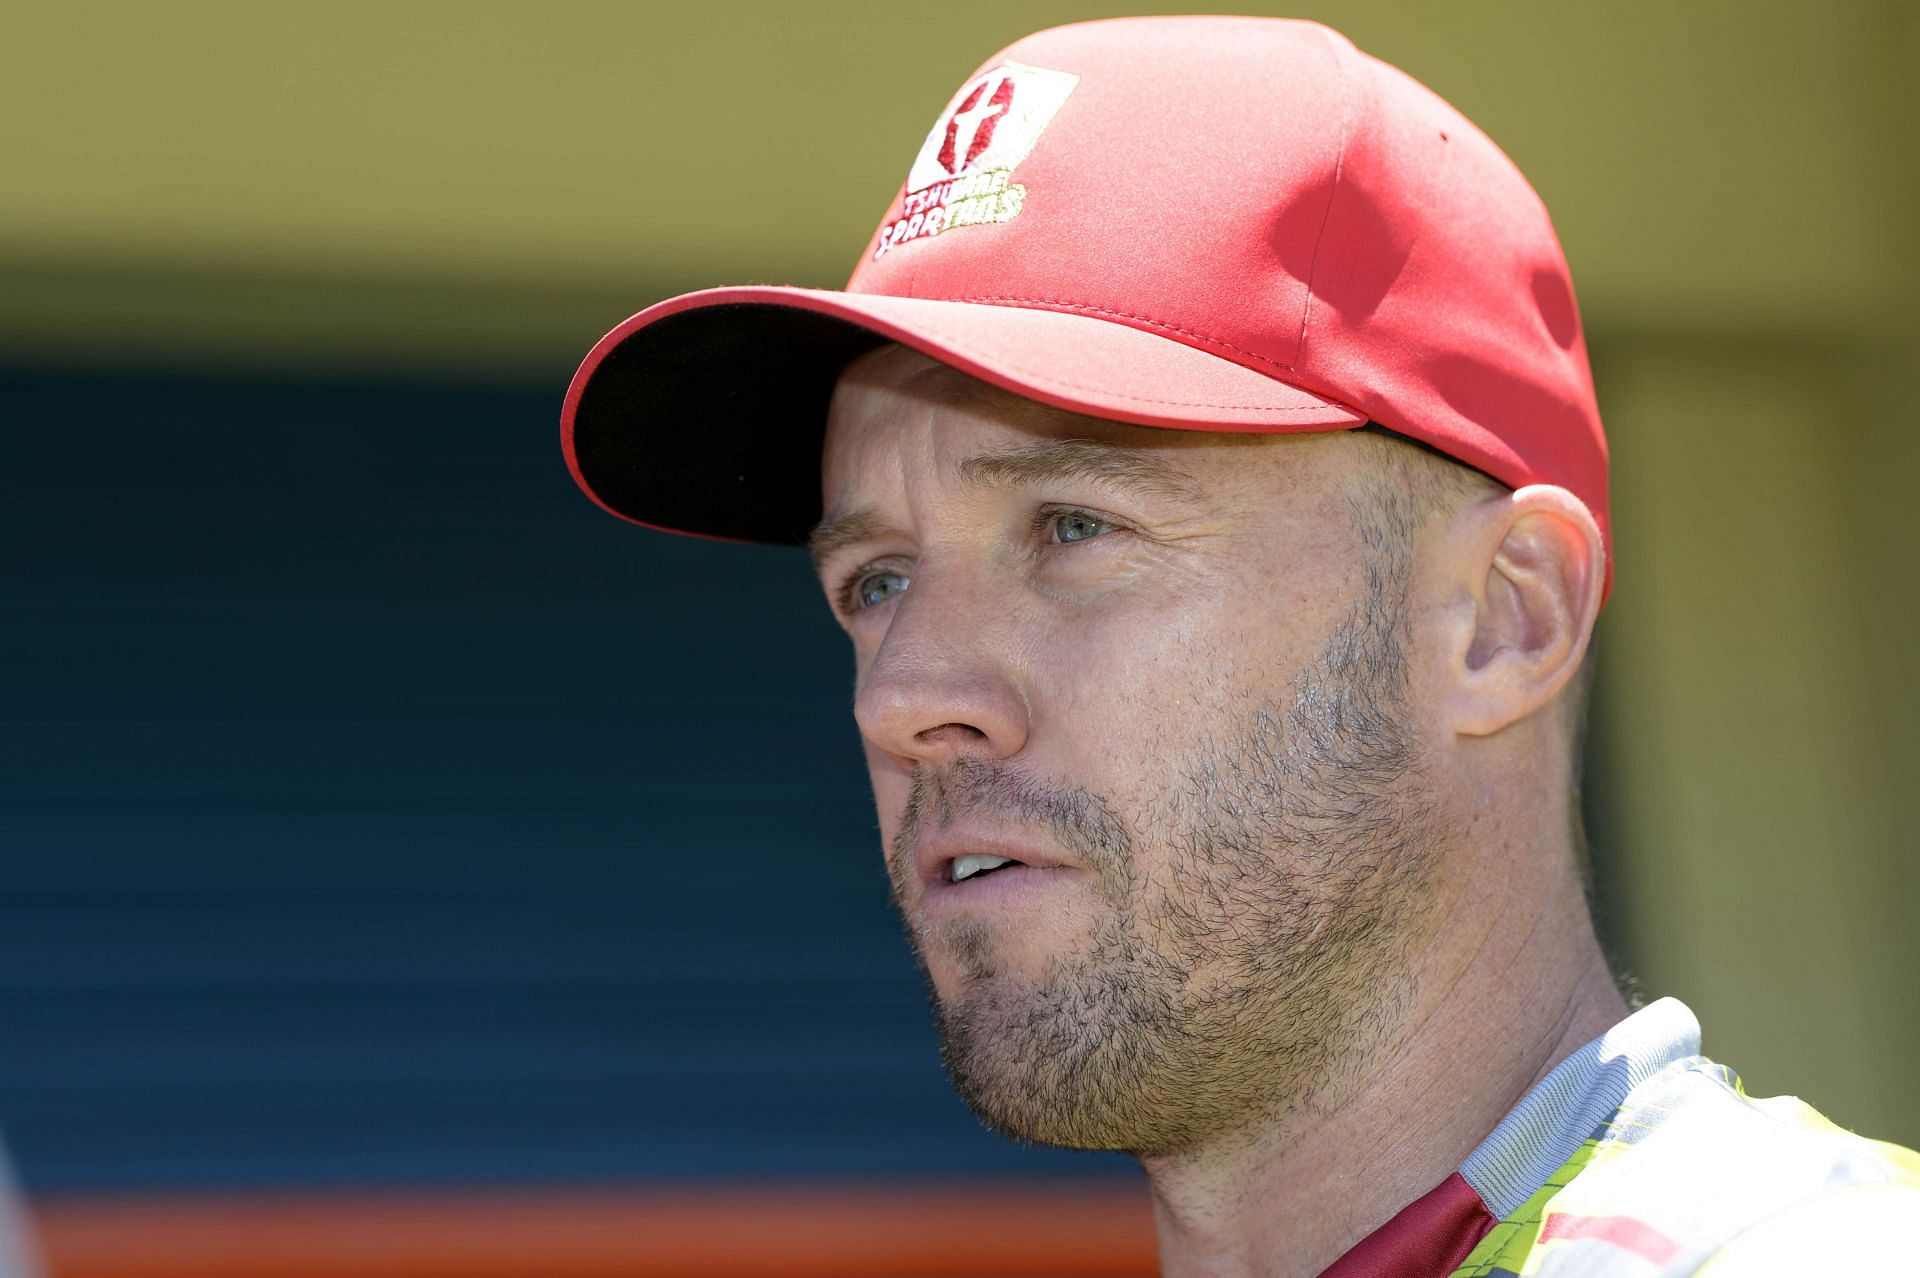 AB de Villiers played for Tshwane Spartans in the Mzansi Super League (Image: Getty)